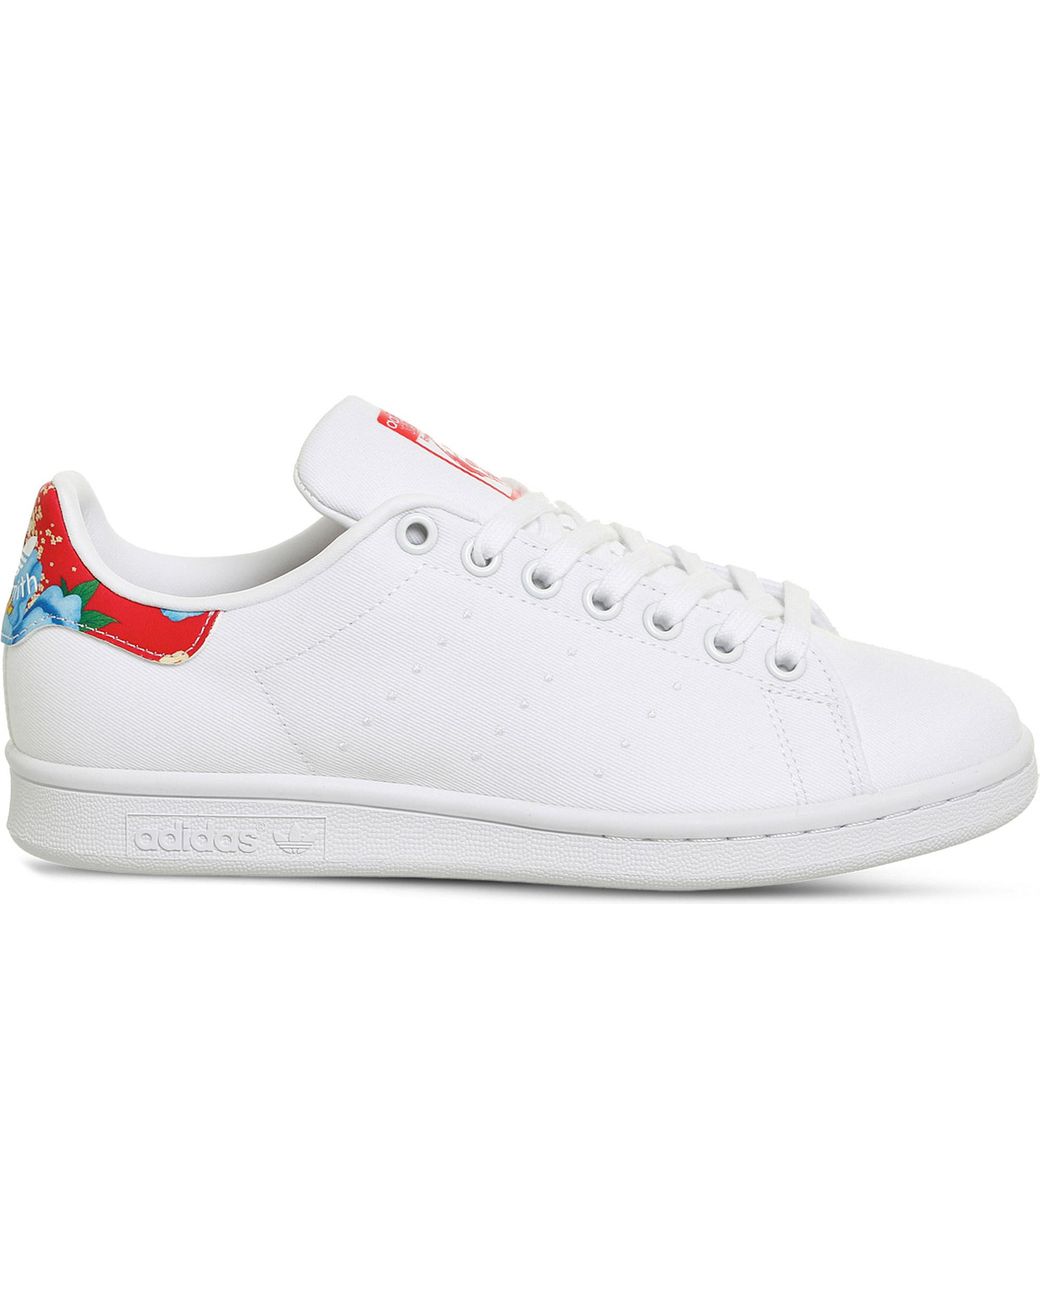 Stan Smith Floral Canvas Trainers in White | Lyst